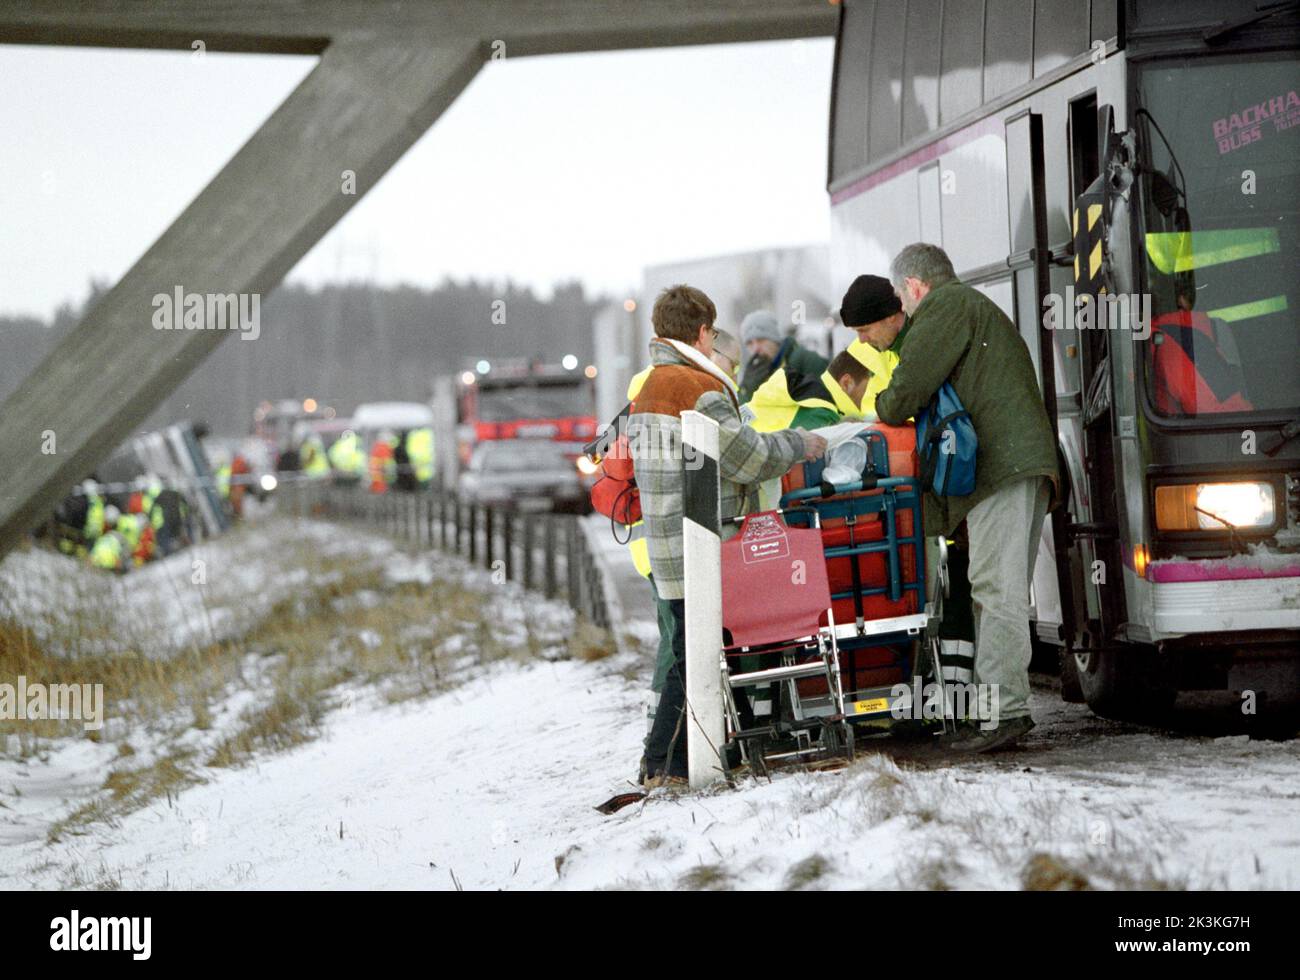 A serious bus accident occurred at half past two on Friday afternoon on the E4 outside Mantorp, Sweden. A 68-year-old man died in the accident. 44 people were taken to hospital. 14 ambulances and as many police cars were called to the scene. Stock Photo